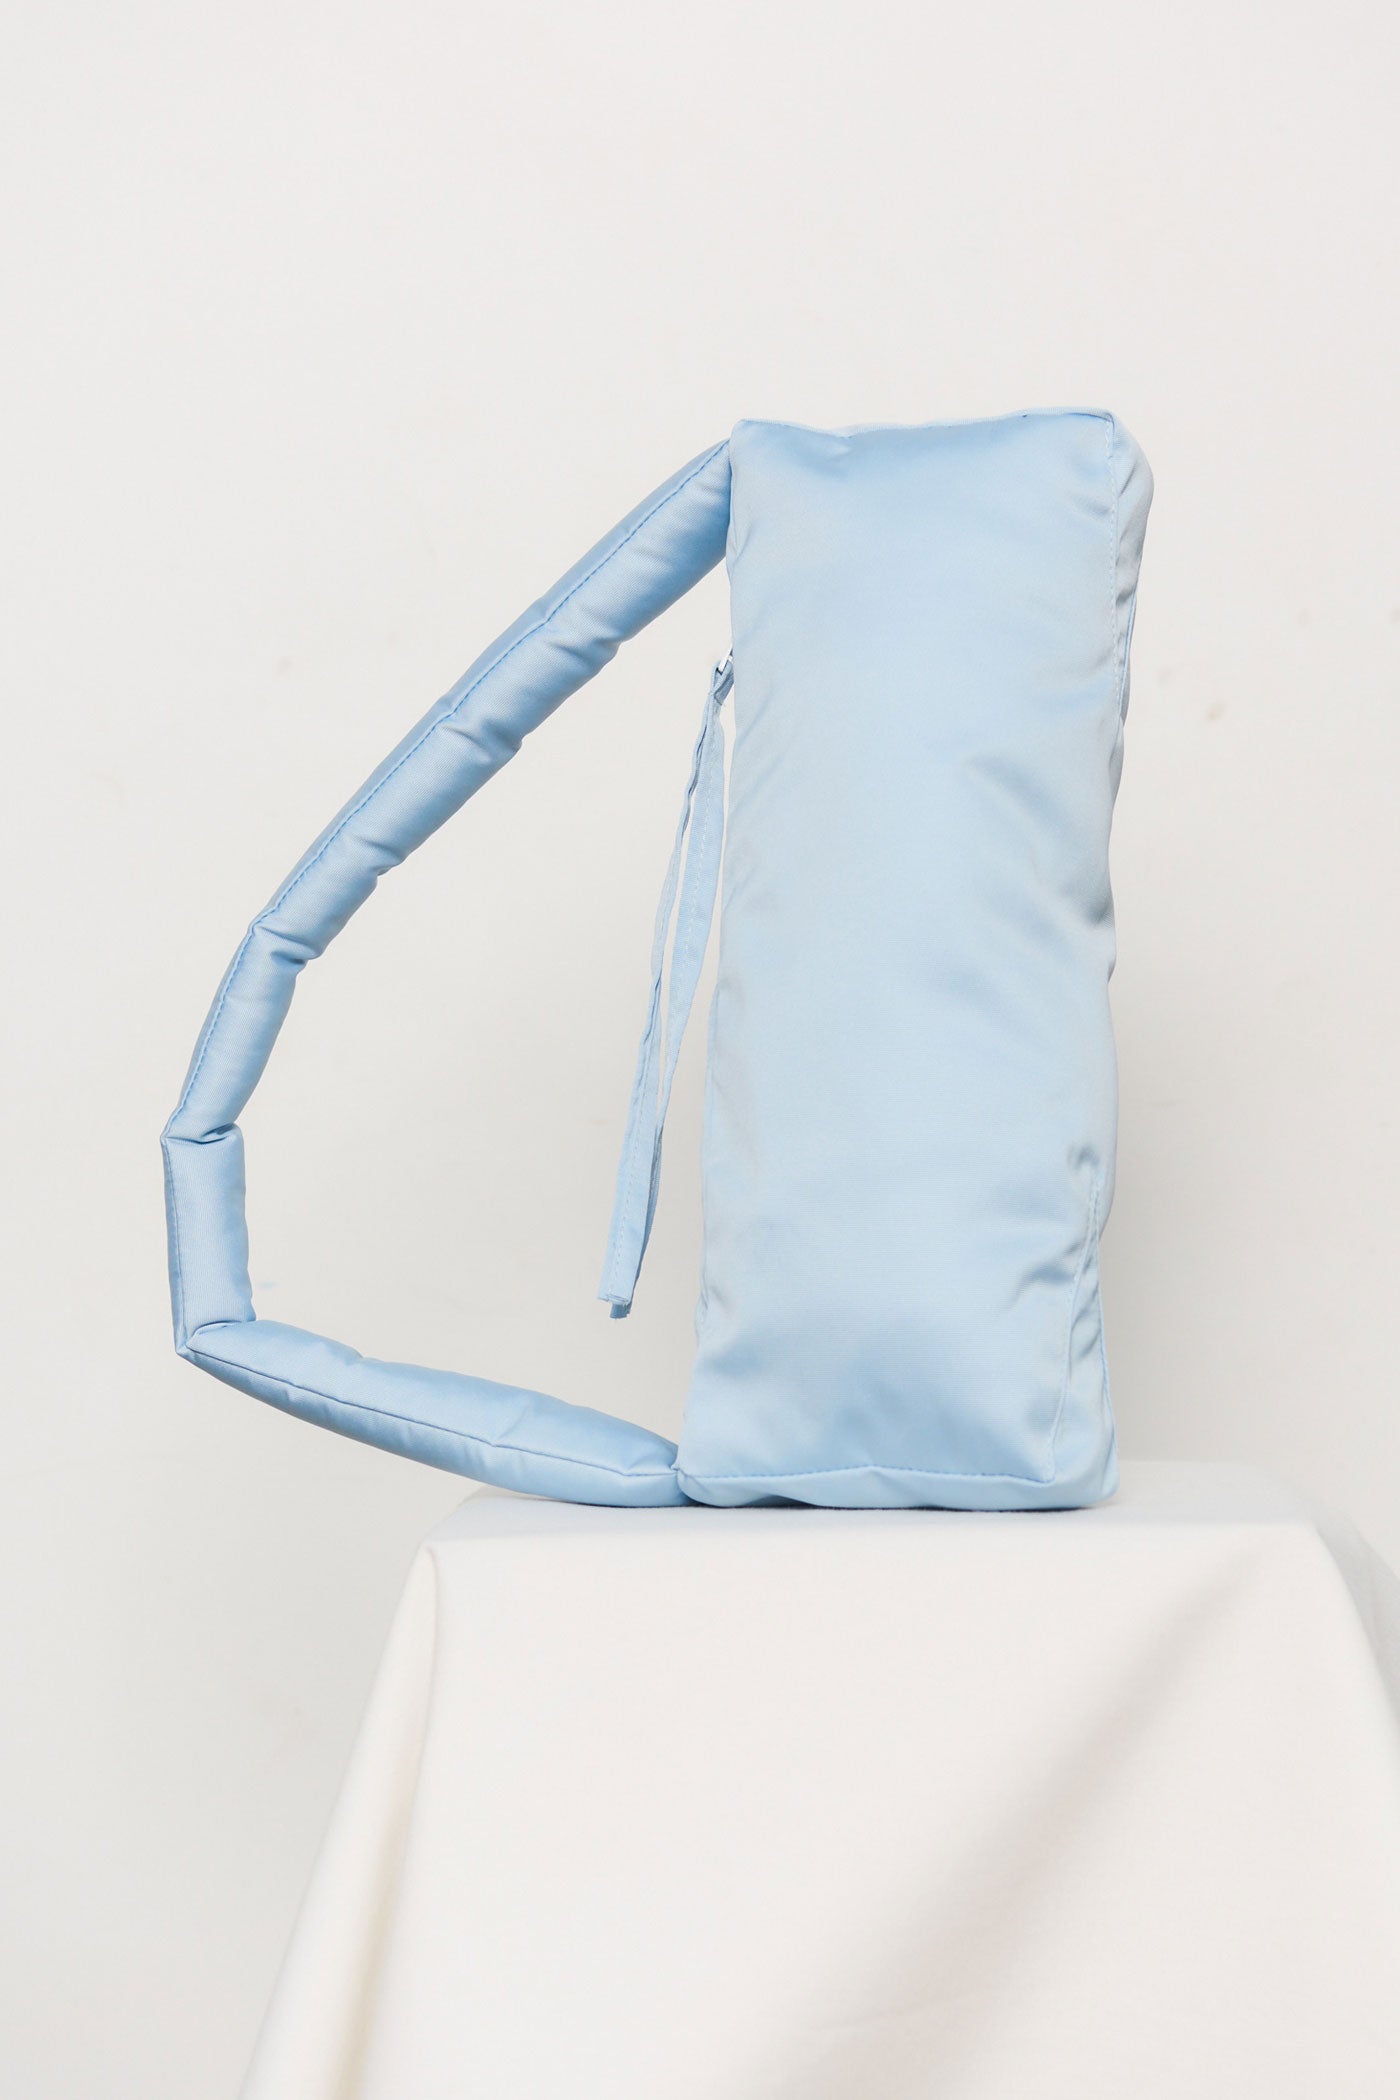 Load image into Gallery viewer, RECTANGULO PUFF BAG - LIGHT BLUE
